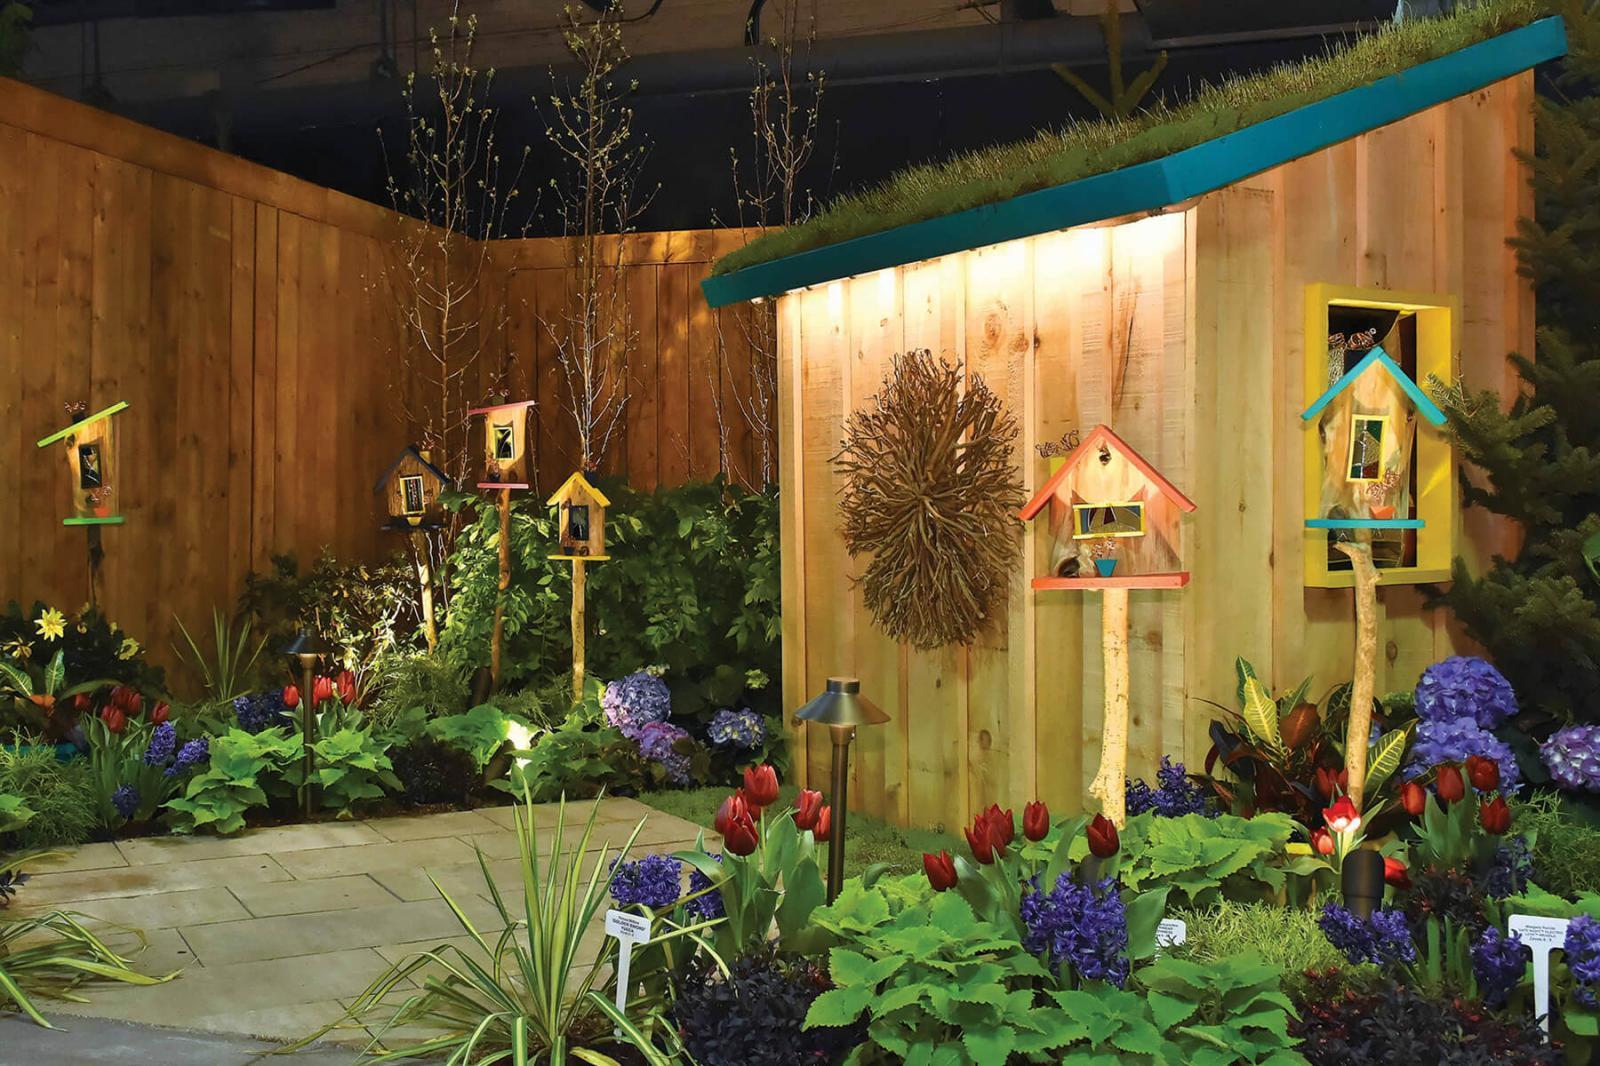 Canada Blooms showcases the green profession